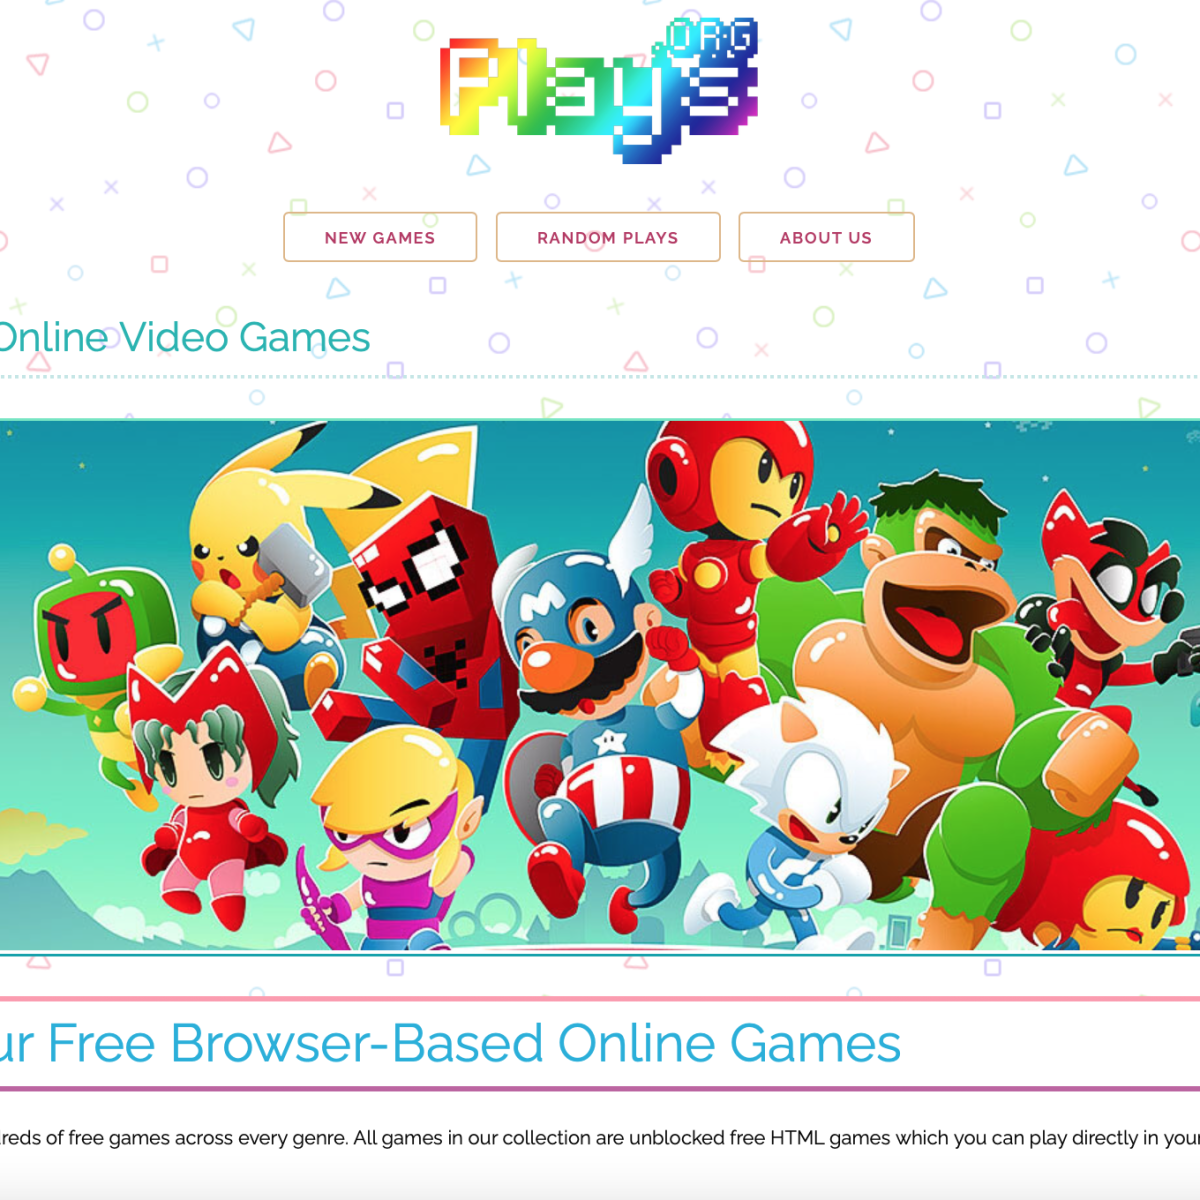 10 Fun Free Games for Kids to Play Online